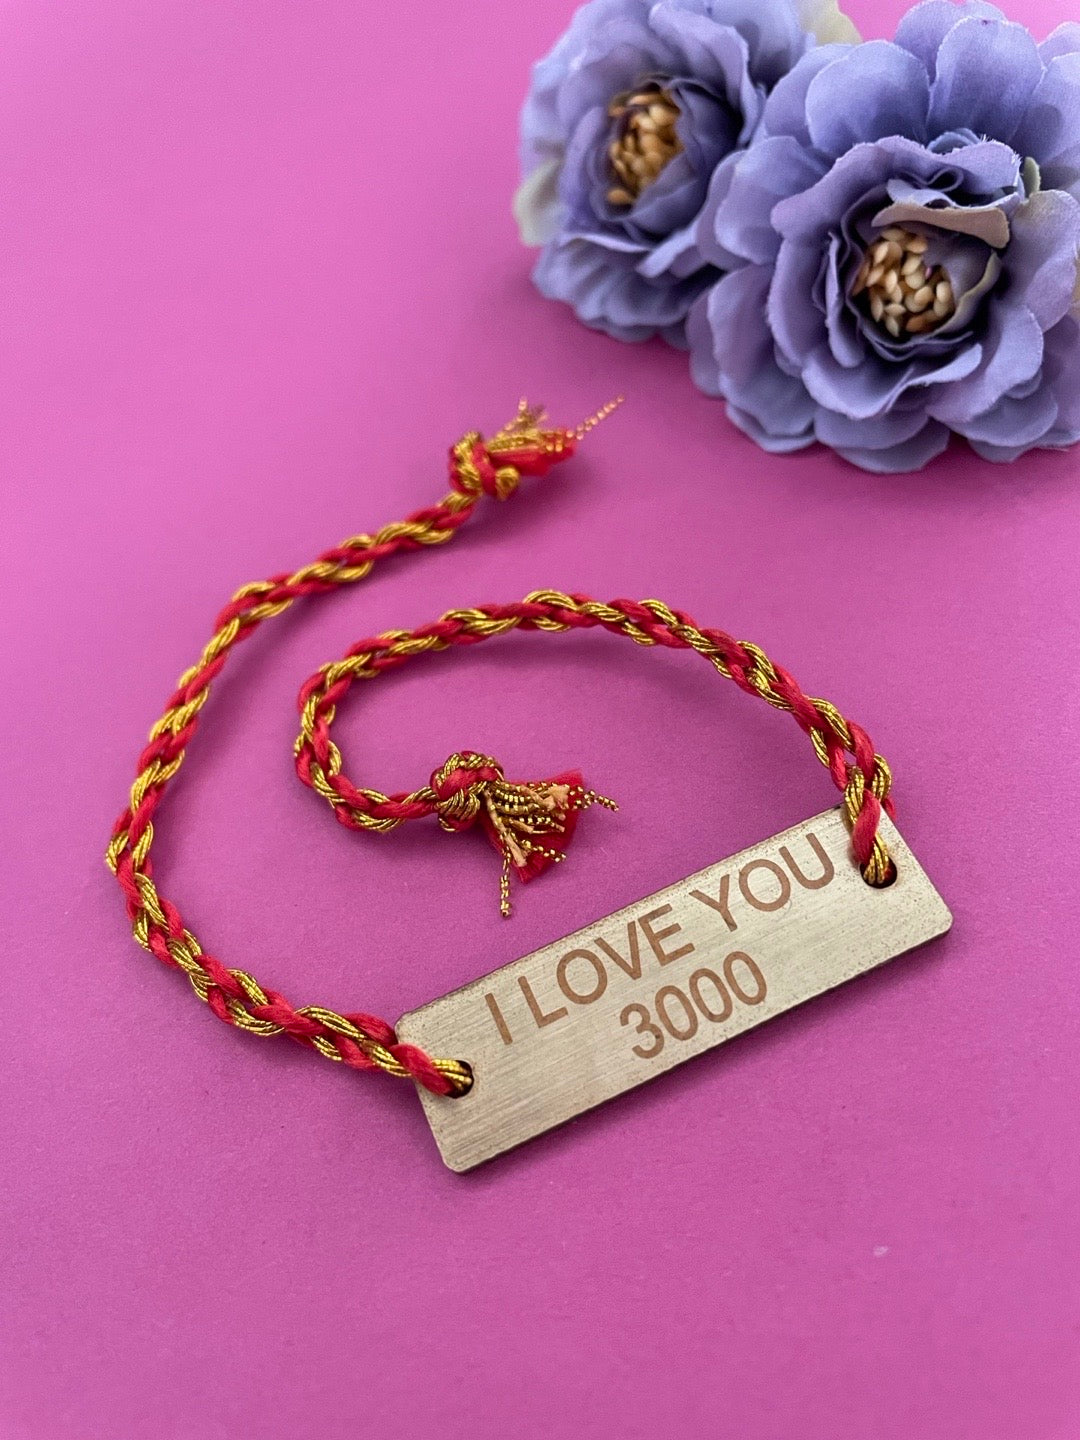 I Love You 3000 Bar Necklace in Sterling Silver to Daughter – mylongingcharm